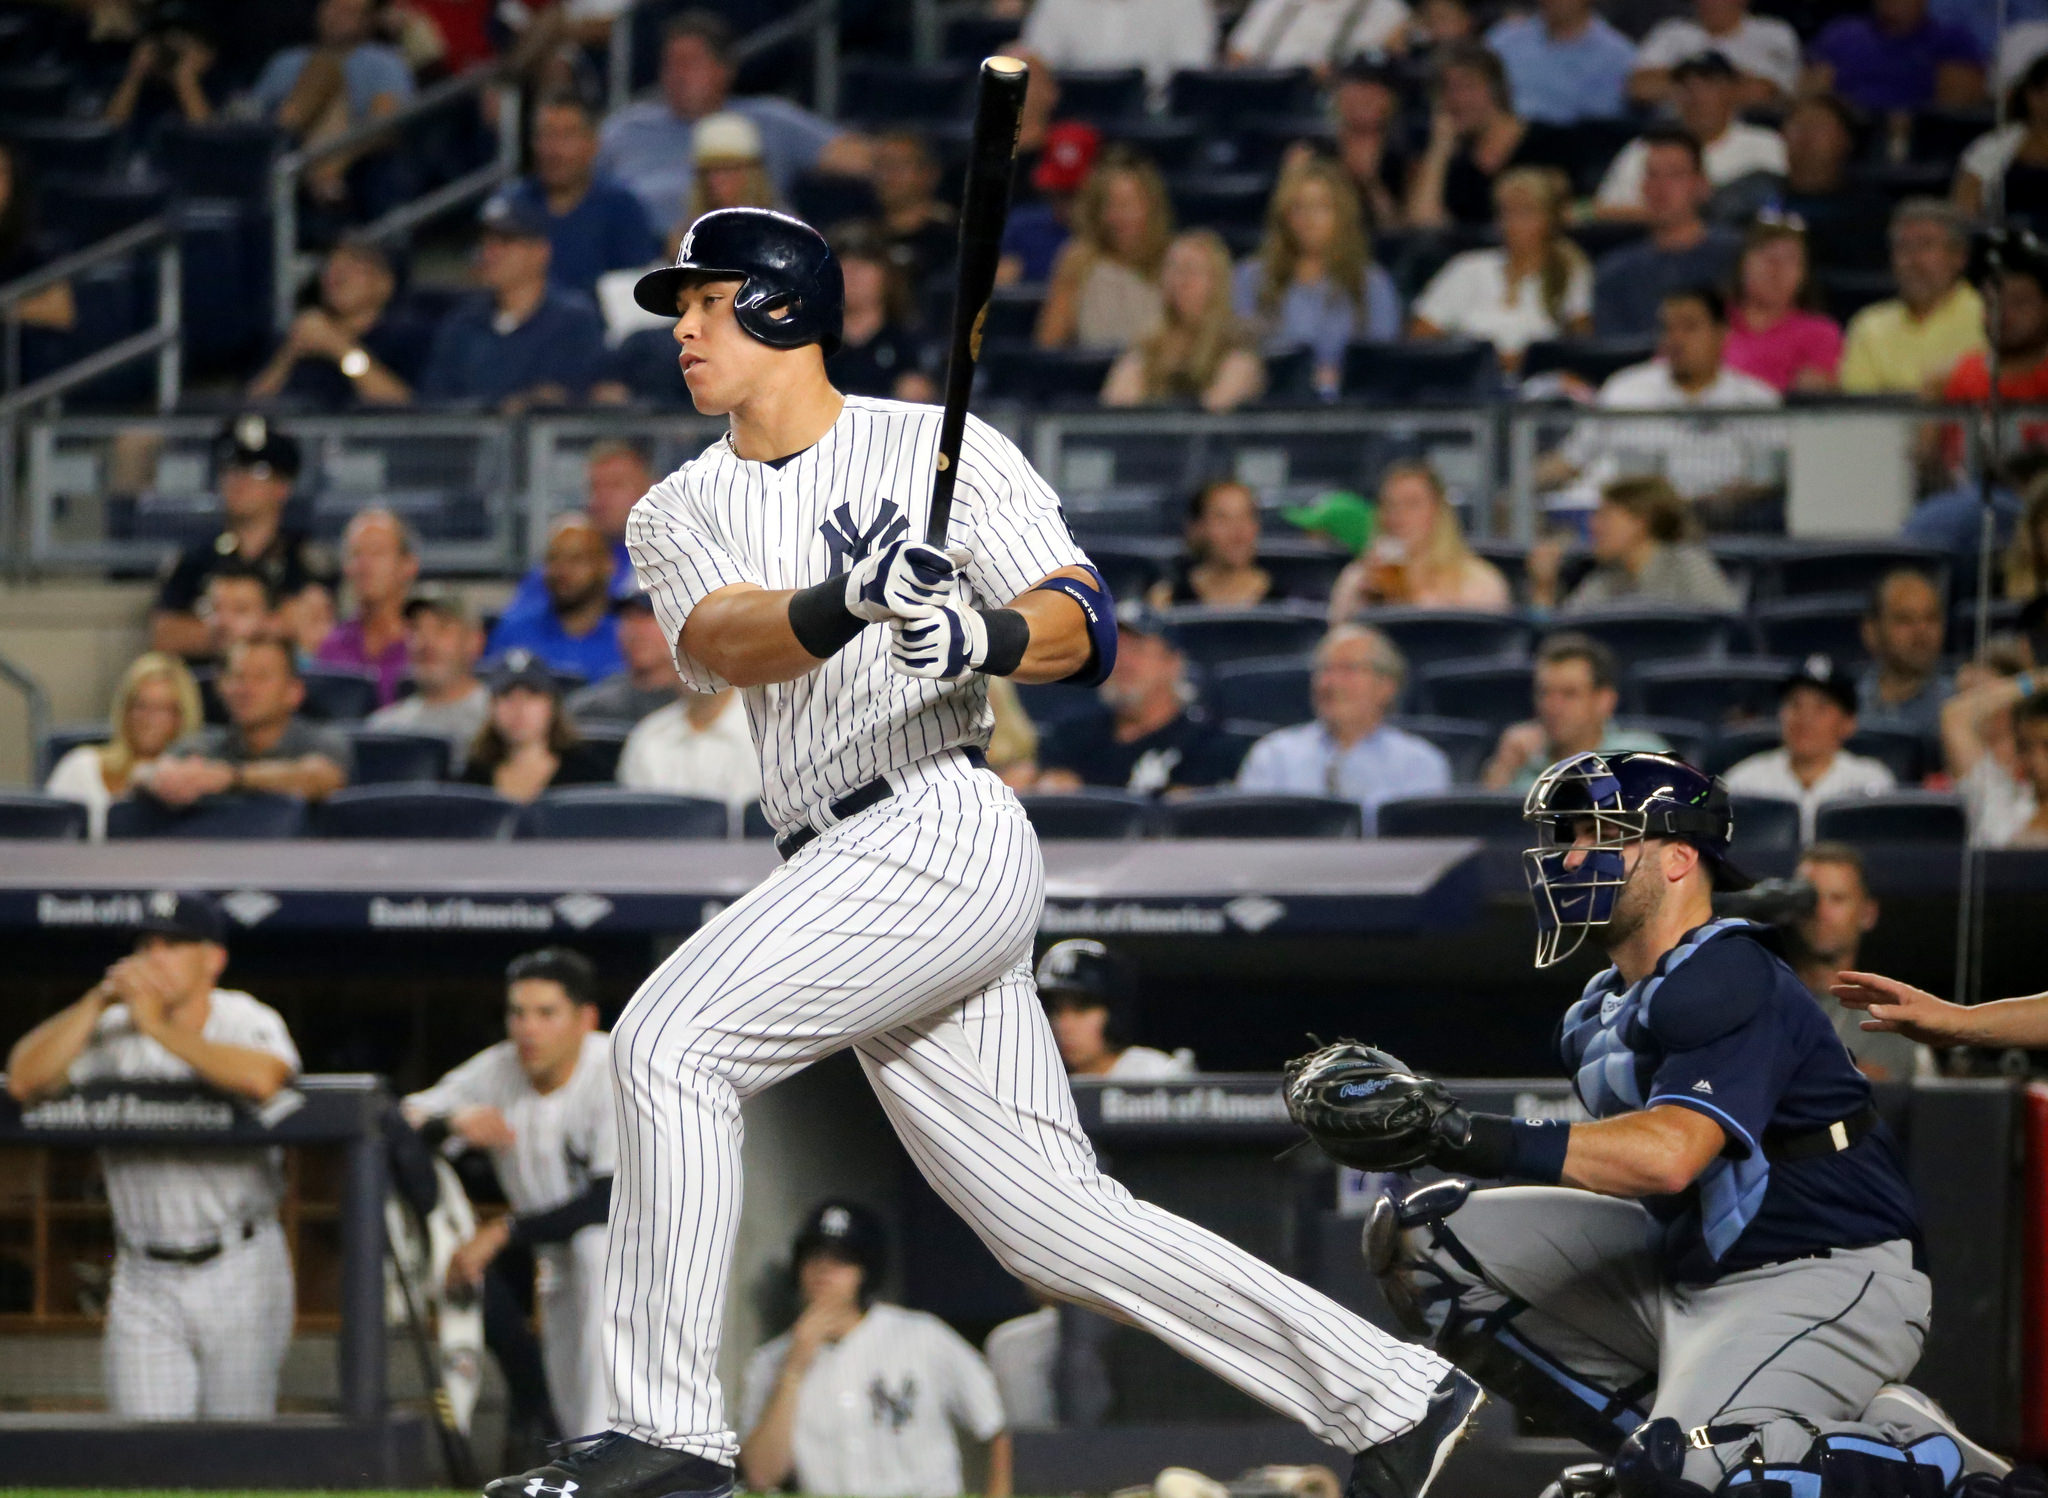 Aaron Judge of the New York Yankees may not crack 50 home runs this year.